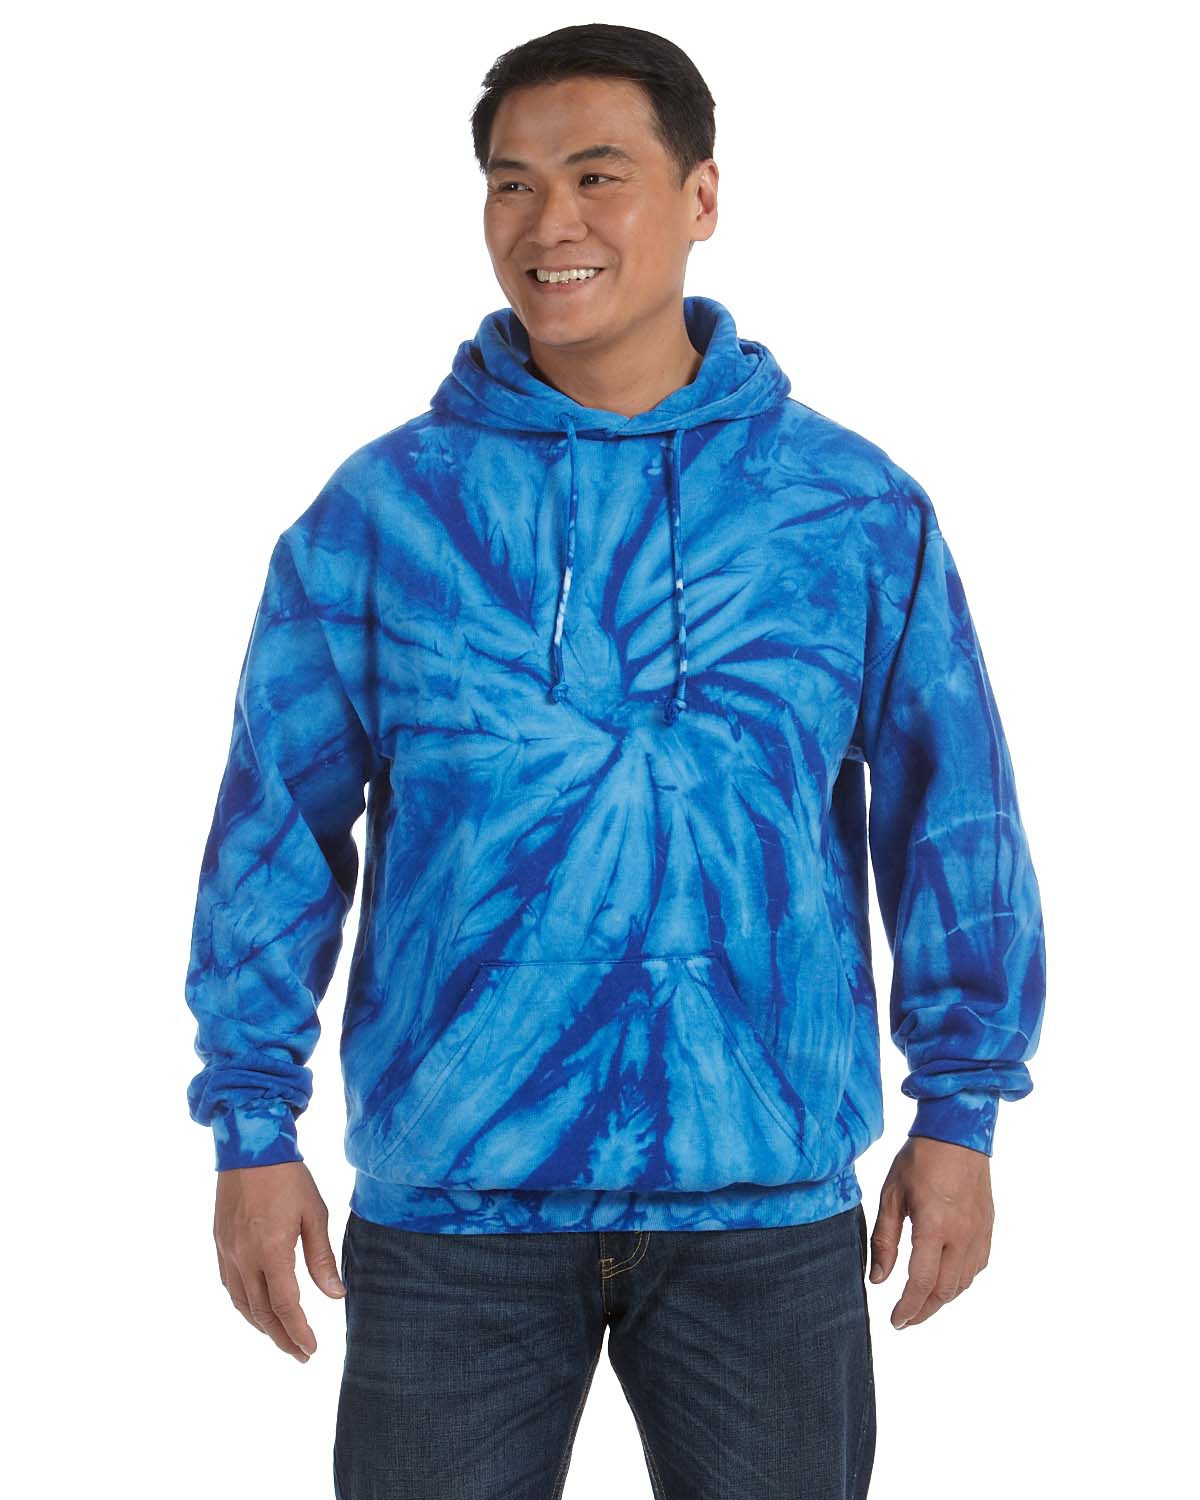 Royal Apparel | Unisex Tie Dye Pullover Hoodie Unisex Adult M | Made in USA